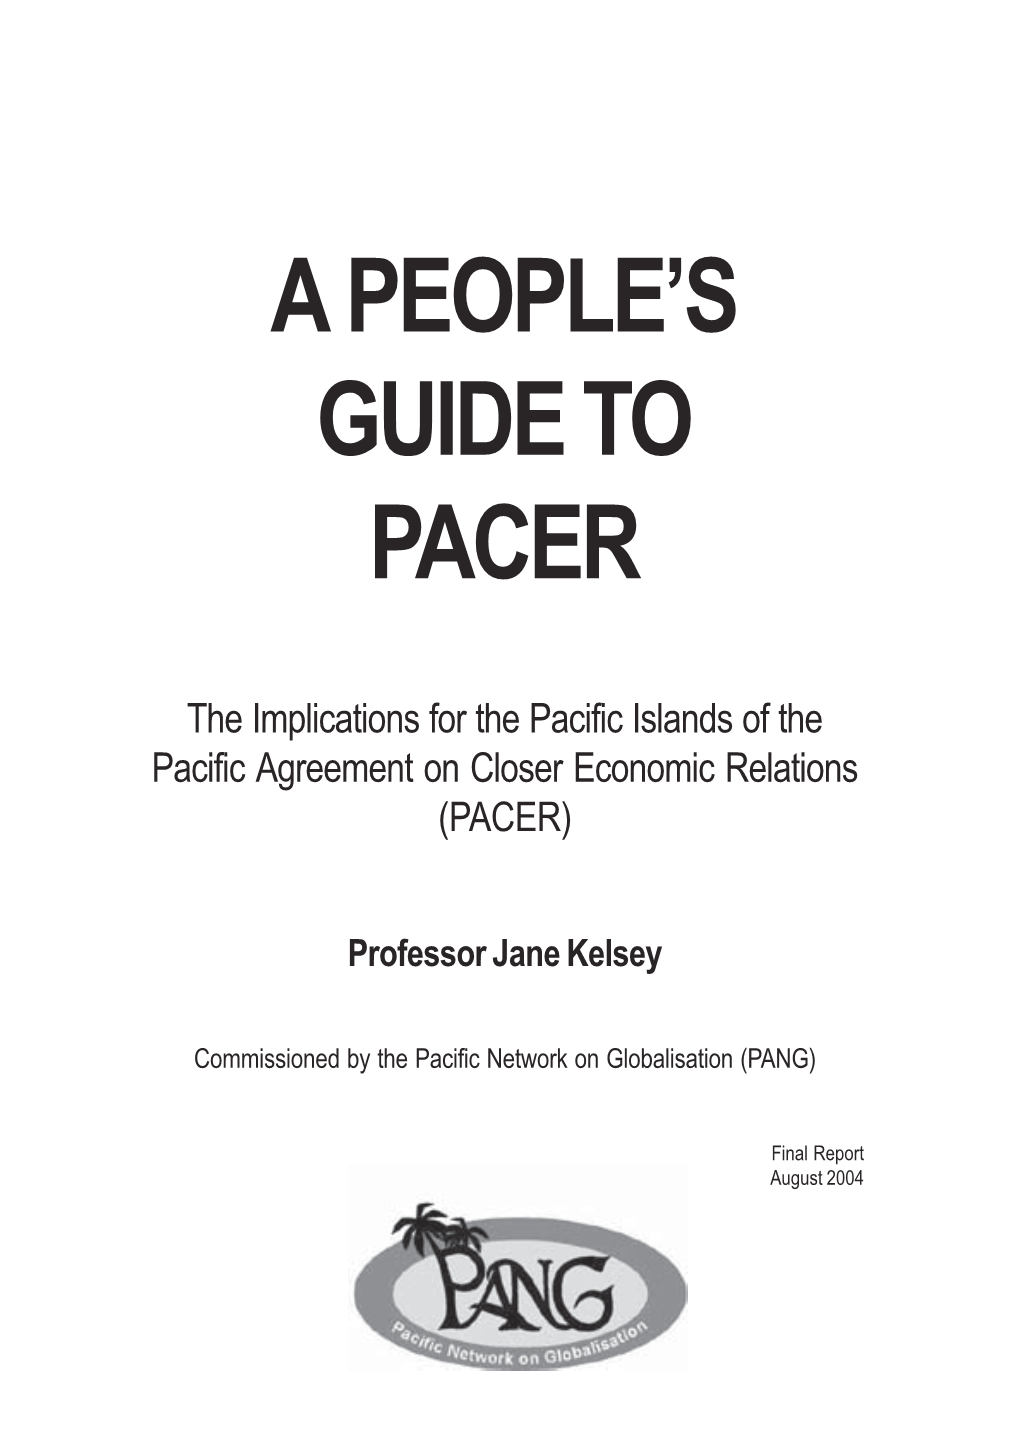 A People's Guide to Pacer